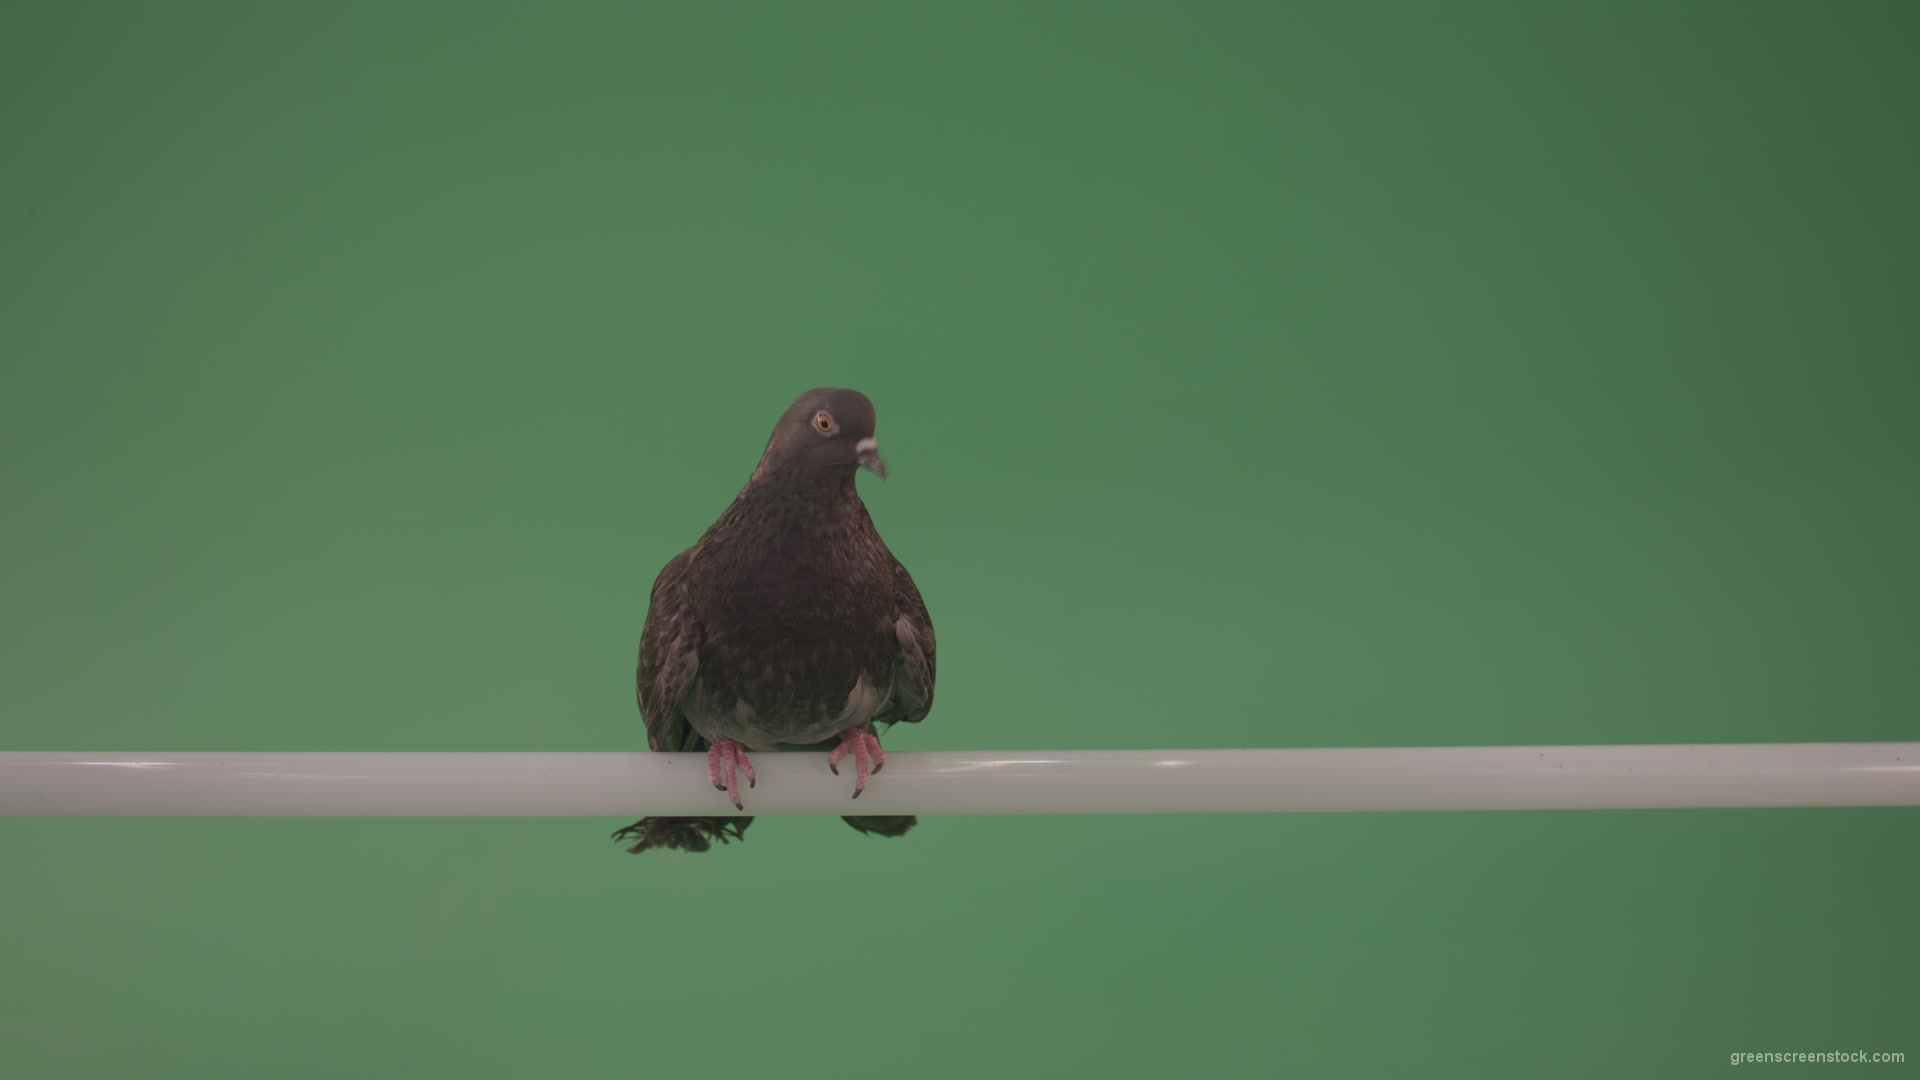 City-bird-of-a-dove-sitting-on-a-branch-in-the-city-isolated-on-green-background_004 Green Screen Stock